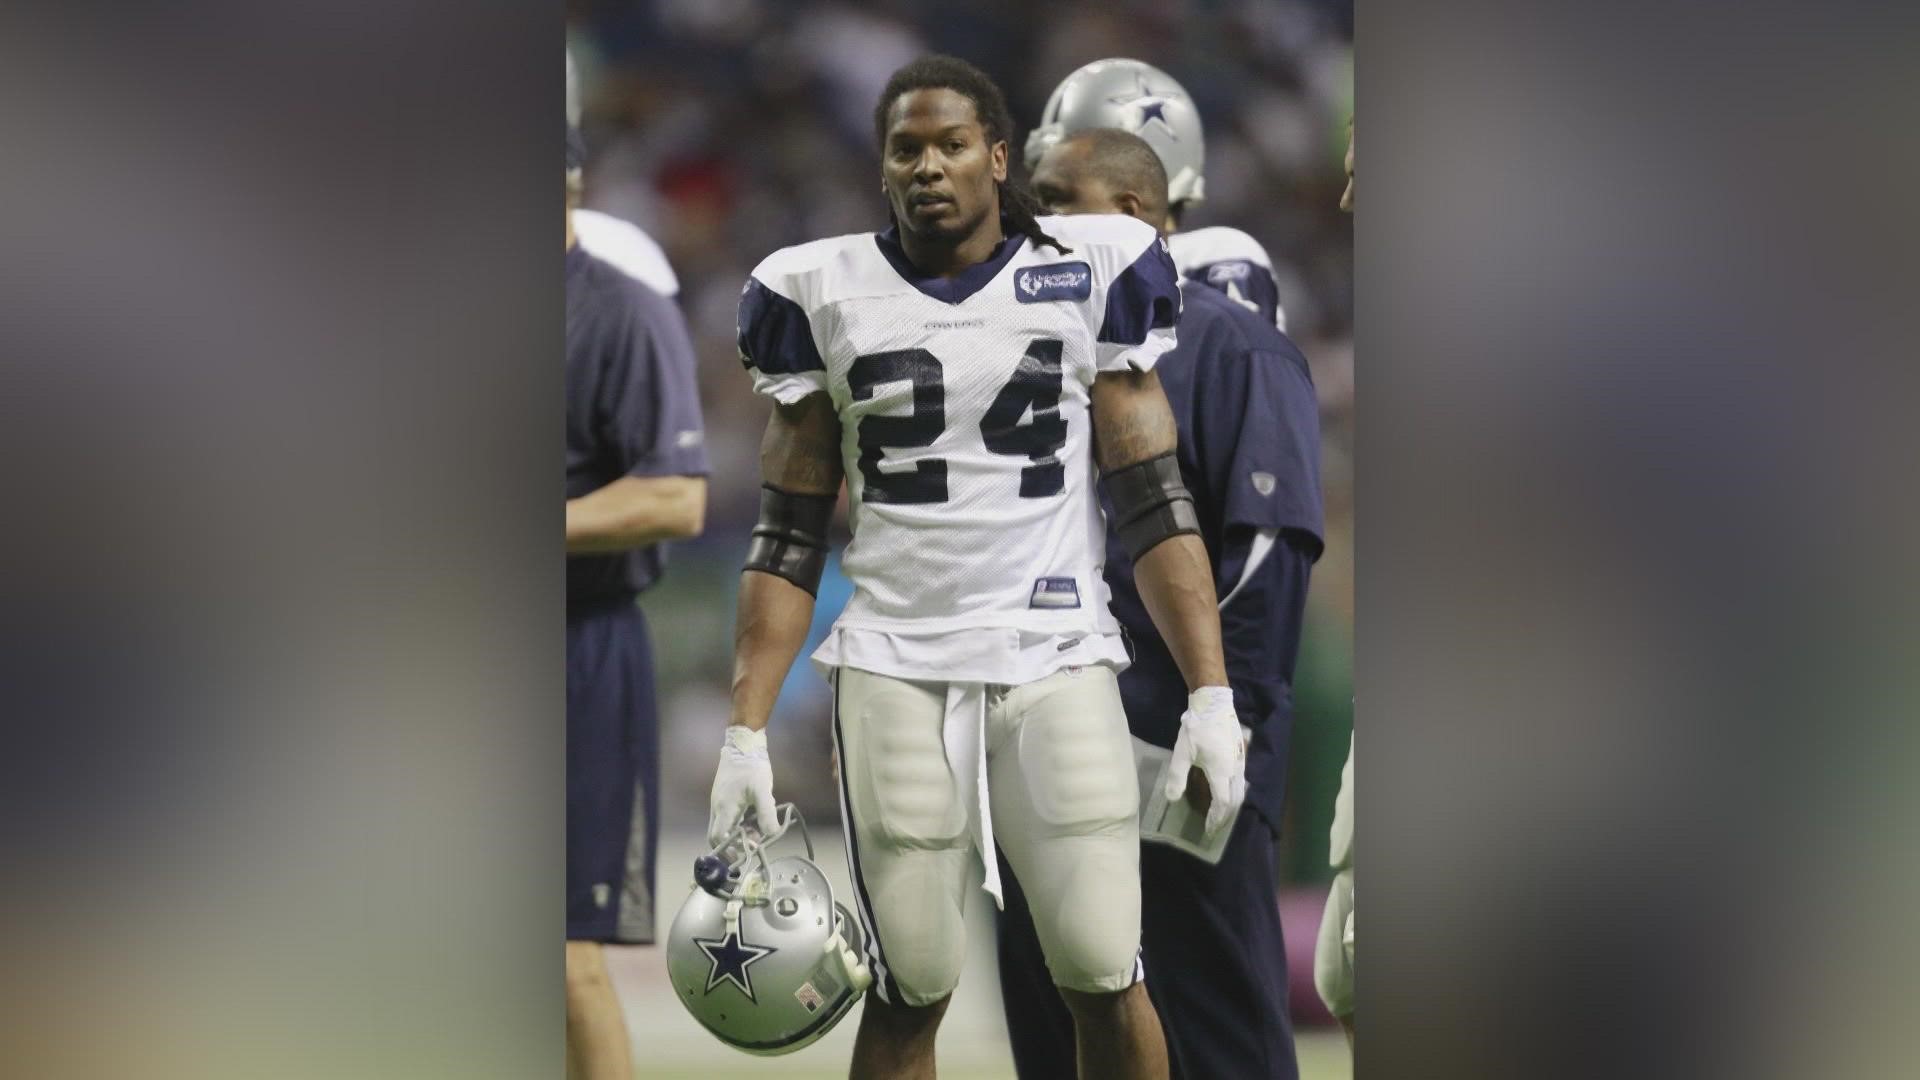 Marion Barber III, who was found dead in his Frisco, Texas, apartment in June, died of a heat stroke, according to the Collin County Medical Examiner.